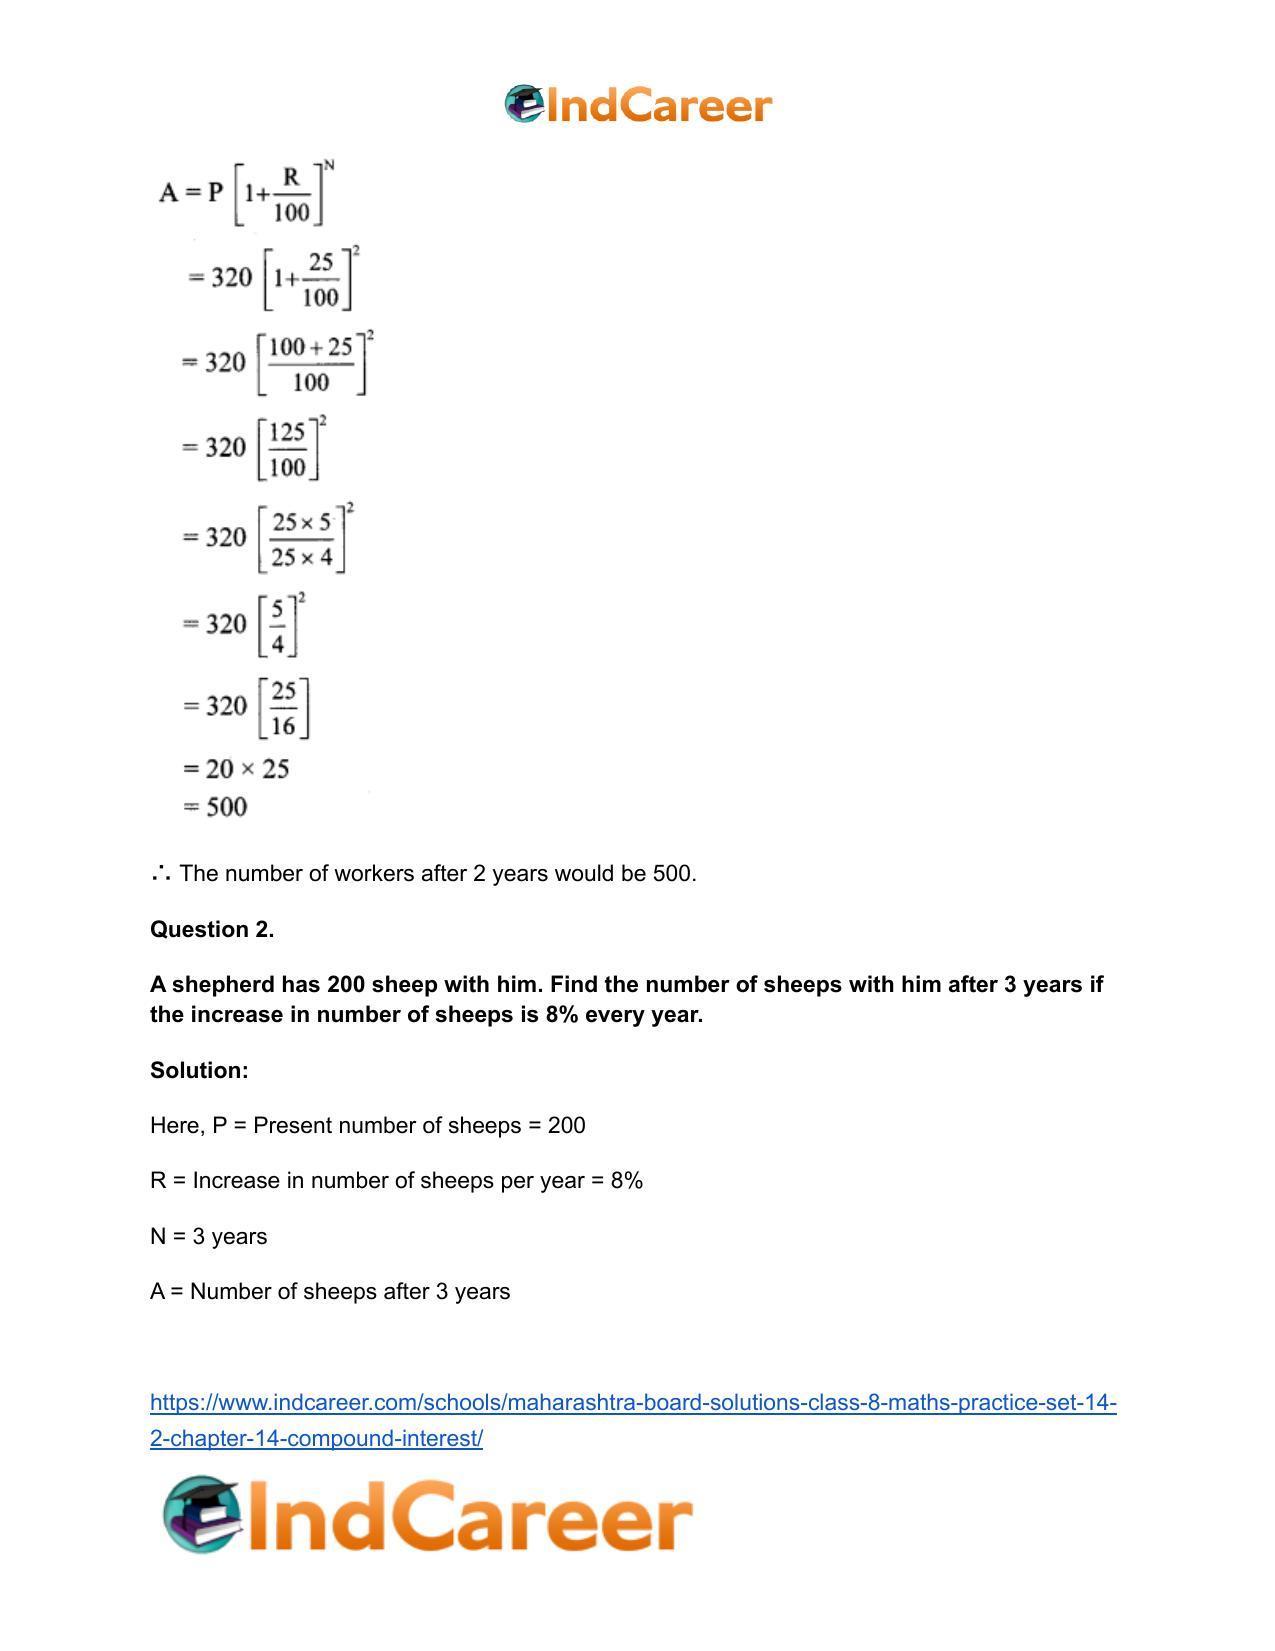 Maharashtra Board Solutions Class 8-Maths (Practice Set 14.2): Chapter 14- Compound Interest - Page 3